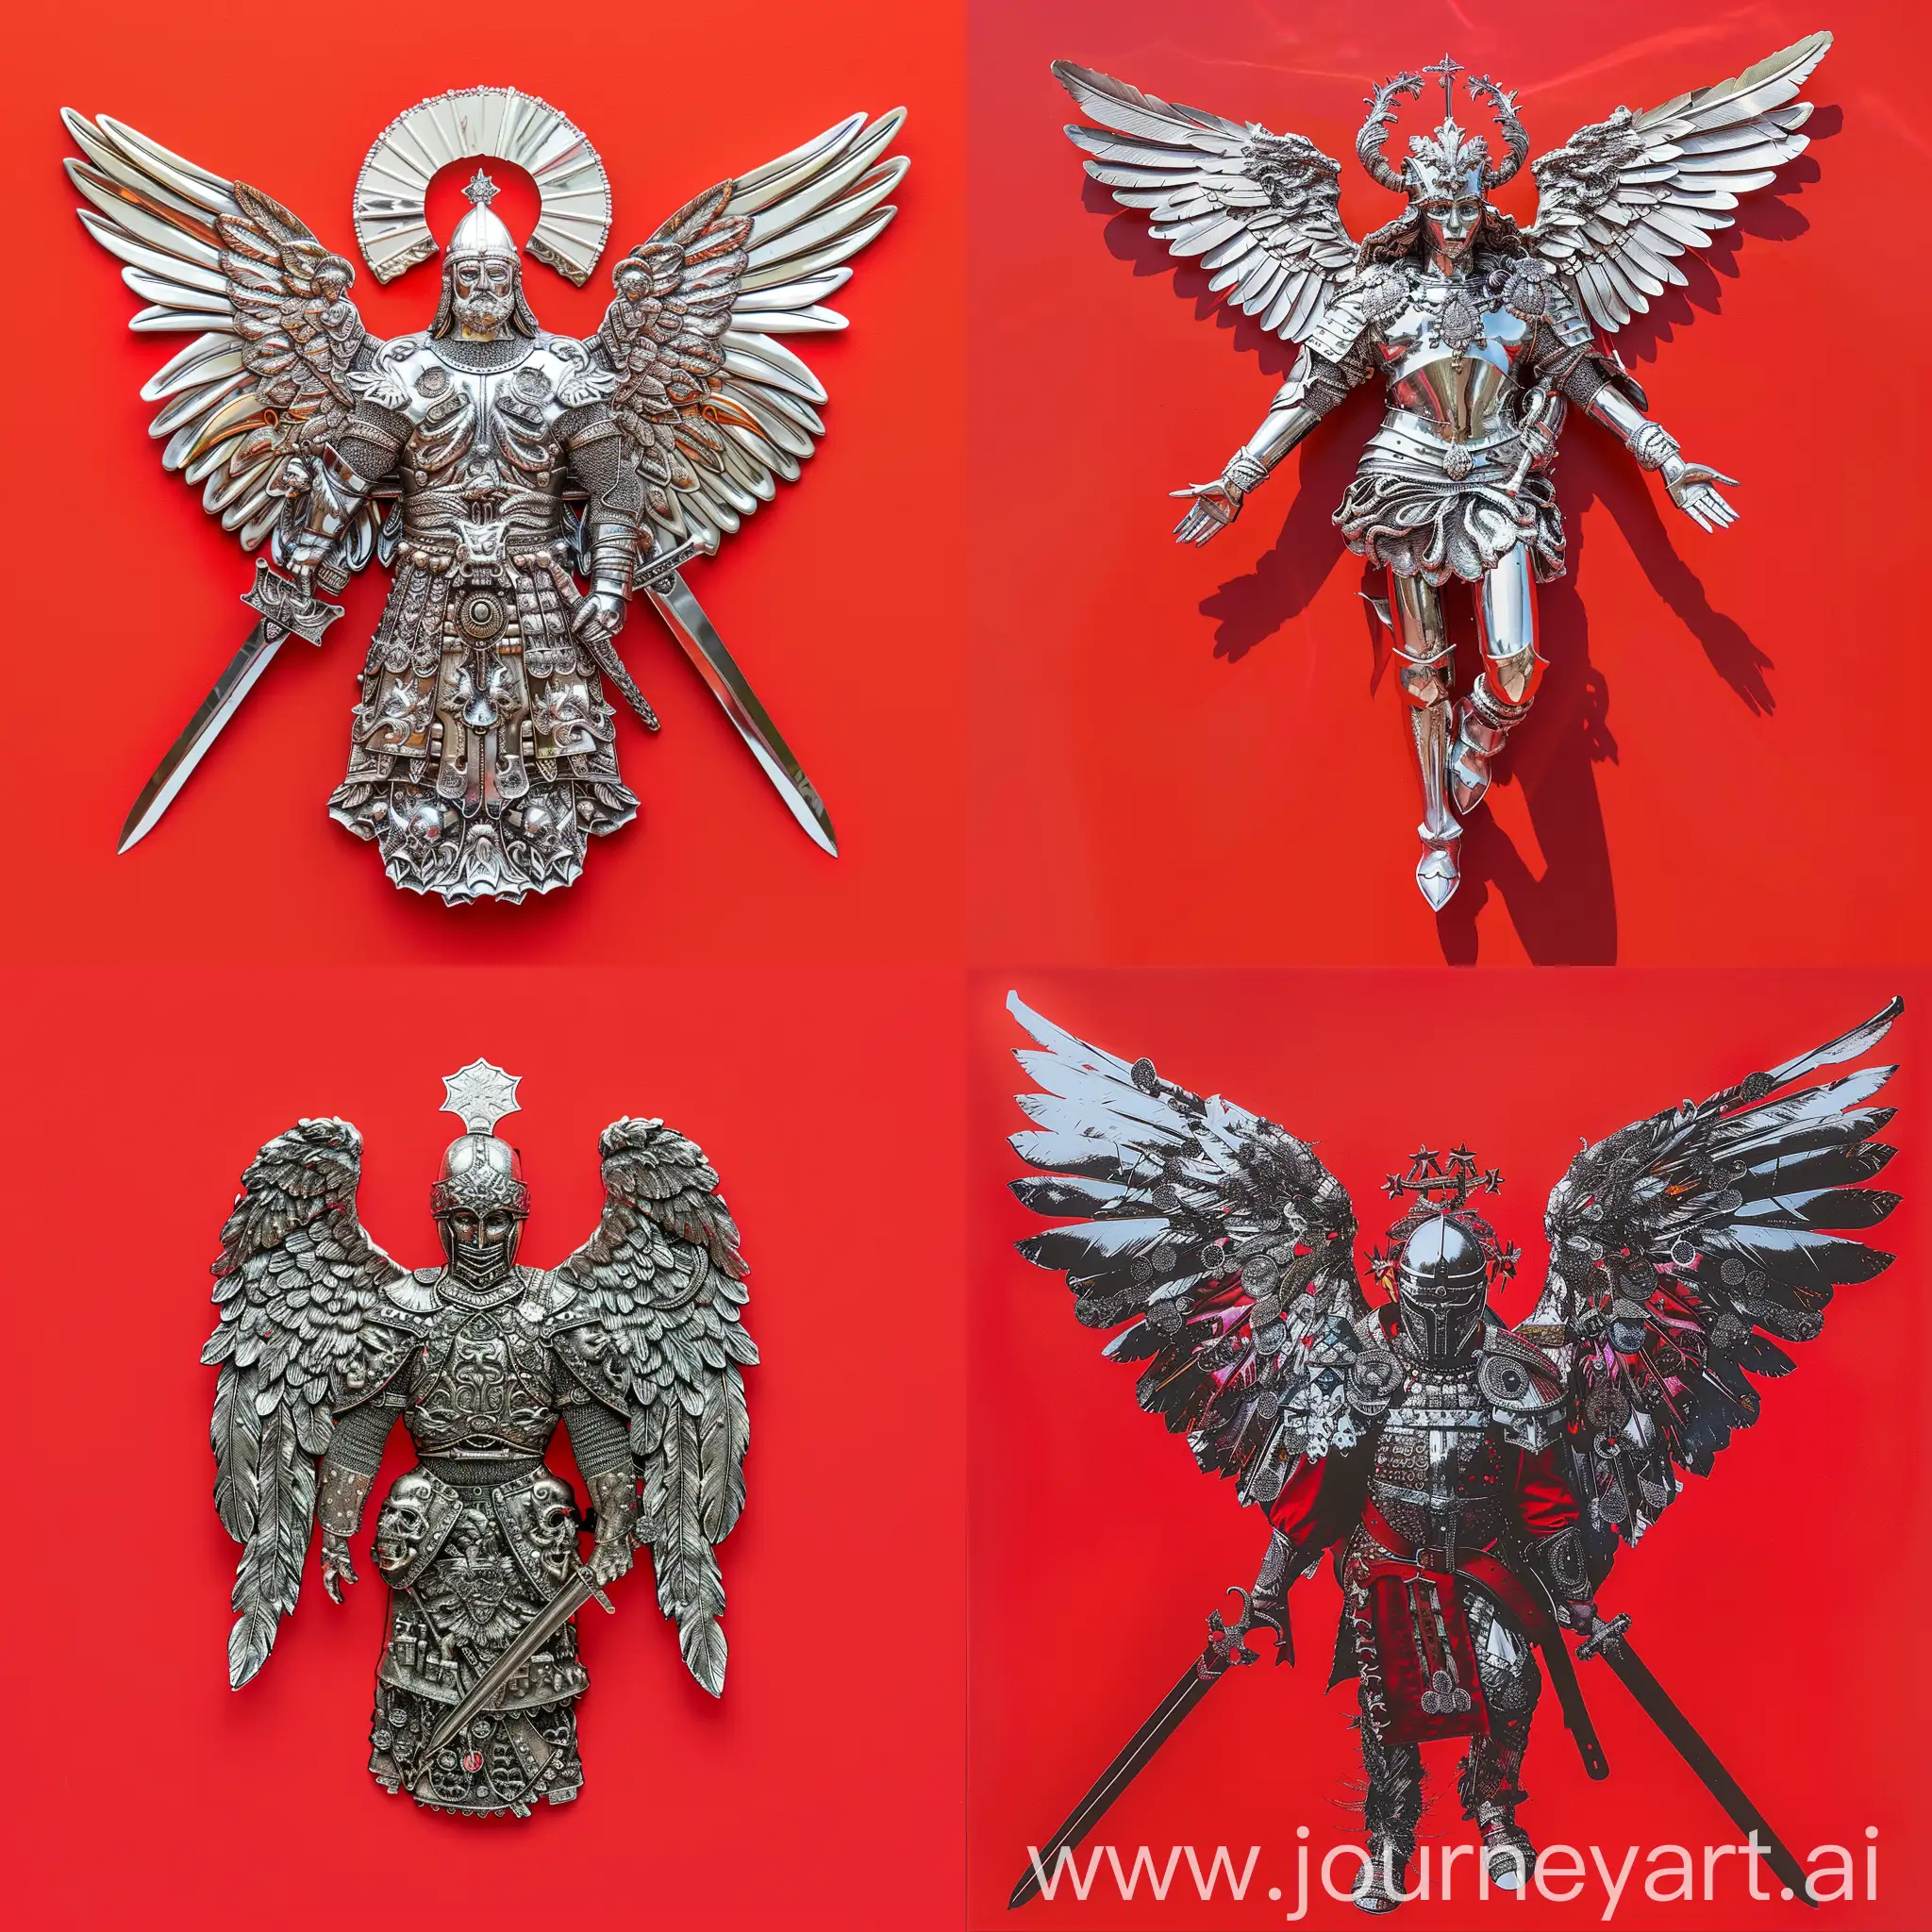 A highly decorated silver angelic slavic warrior on a bright red background